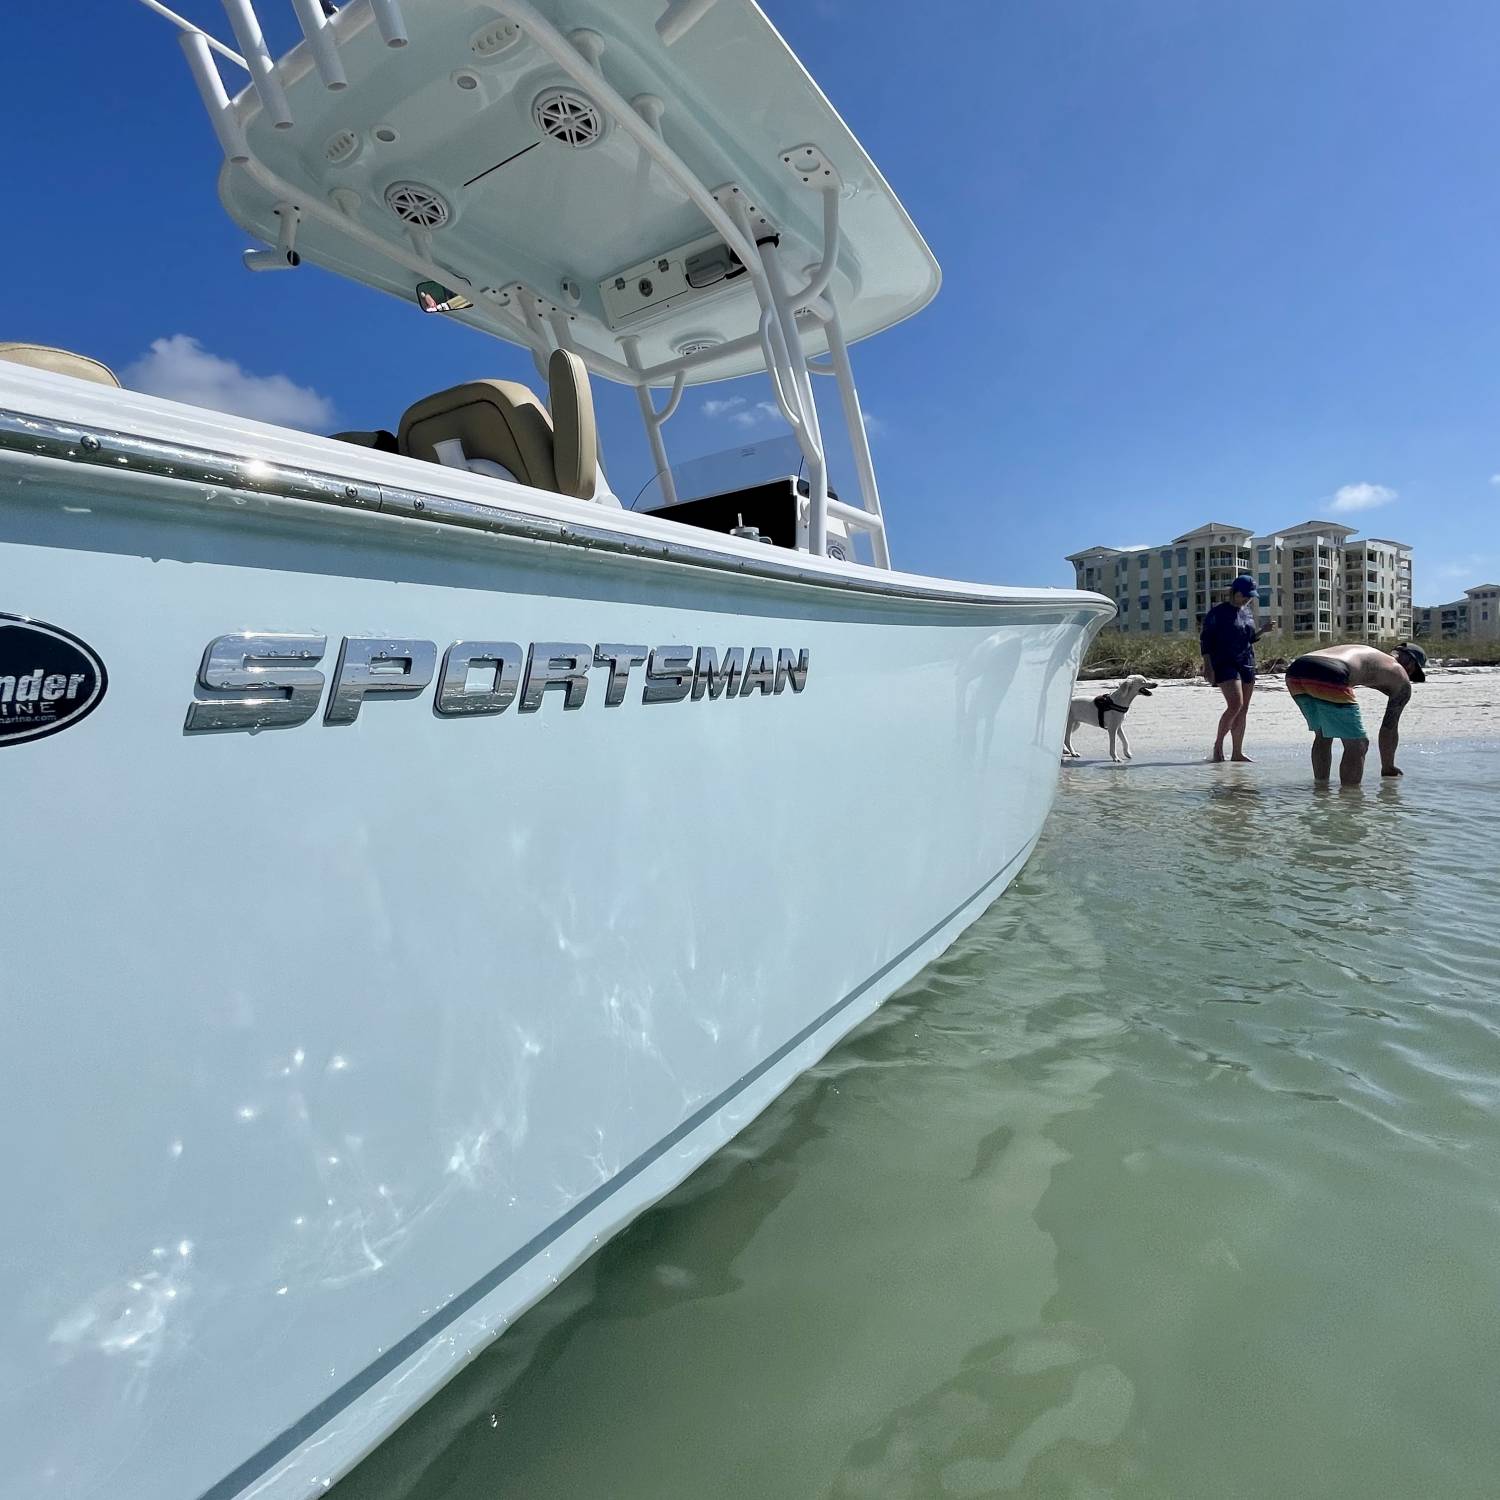 Title: Beached - On board their Sportsman Heritage 241 Center Console - Location: Shell key Florida. Participating in the Photo Contest #SportsmanJune2023